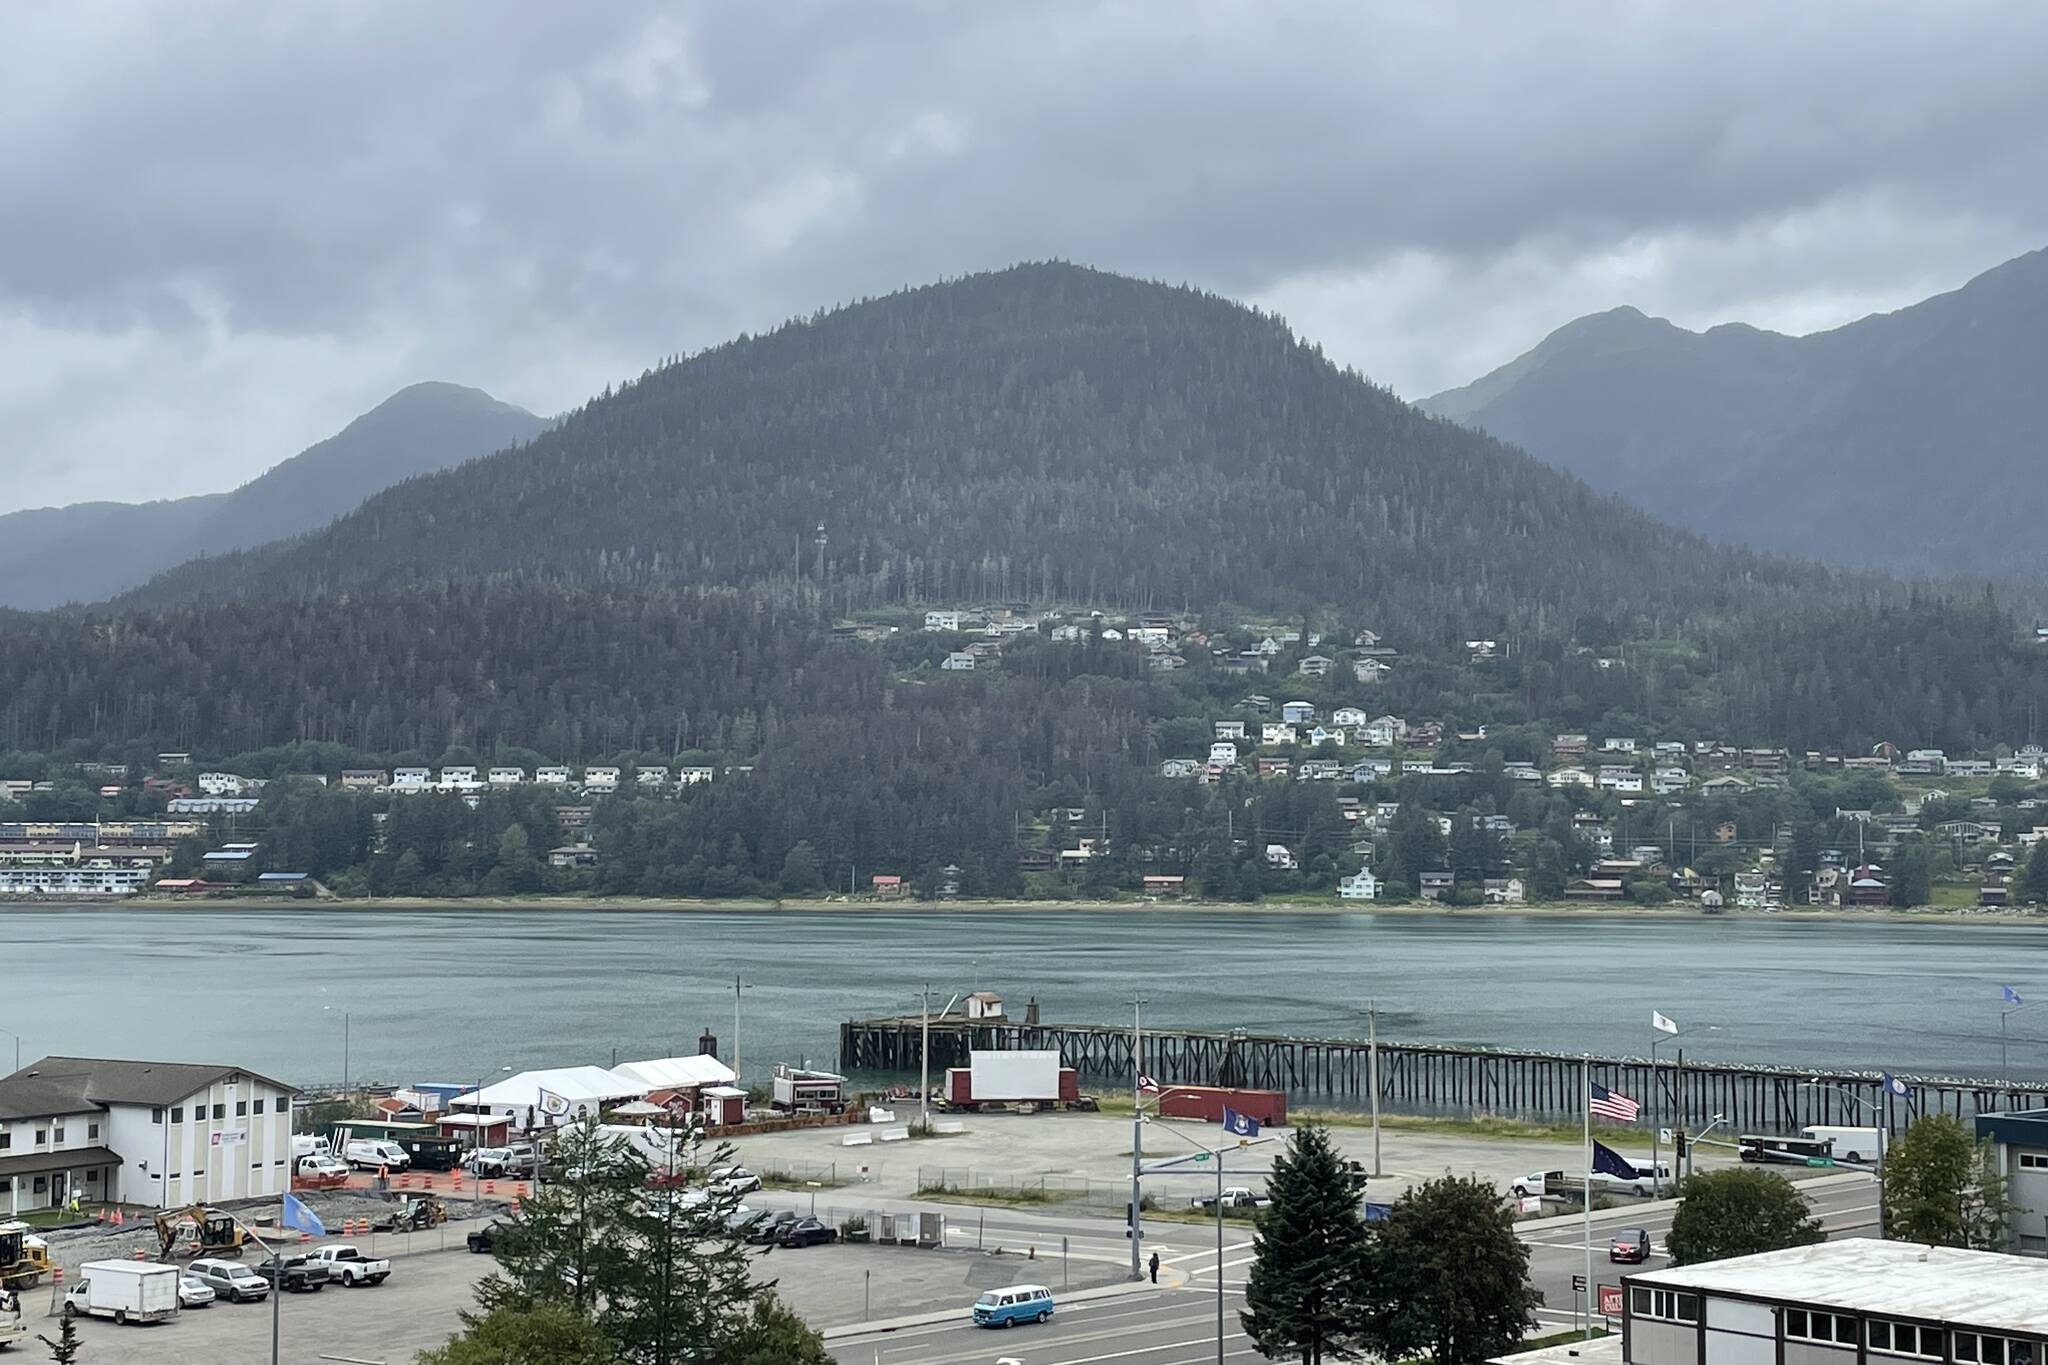 Norwegian Cruise Lines announced in late August that it would donate a 2.9 acre plot of land owned by the cruise line since 2019 on Juneau’s waterfront to Huna Totem Corporation to develop. (Michael S. Lockett / Juneau Empire File)